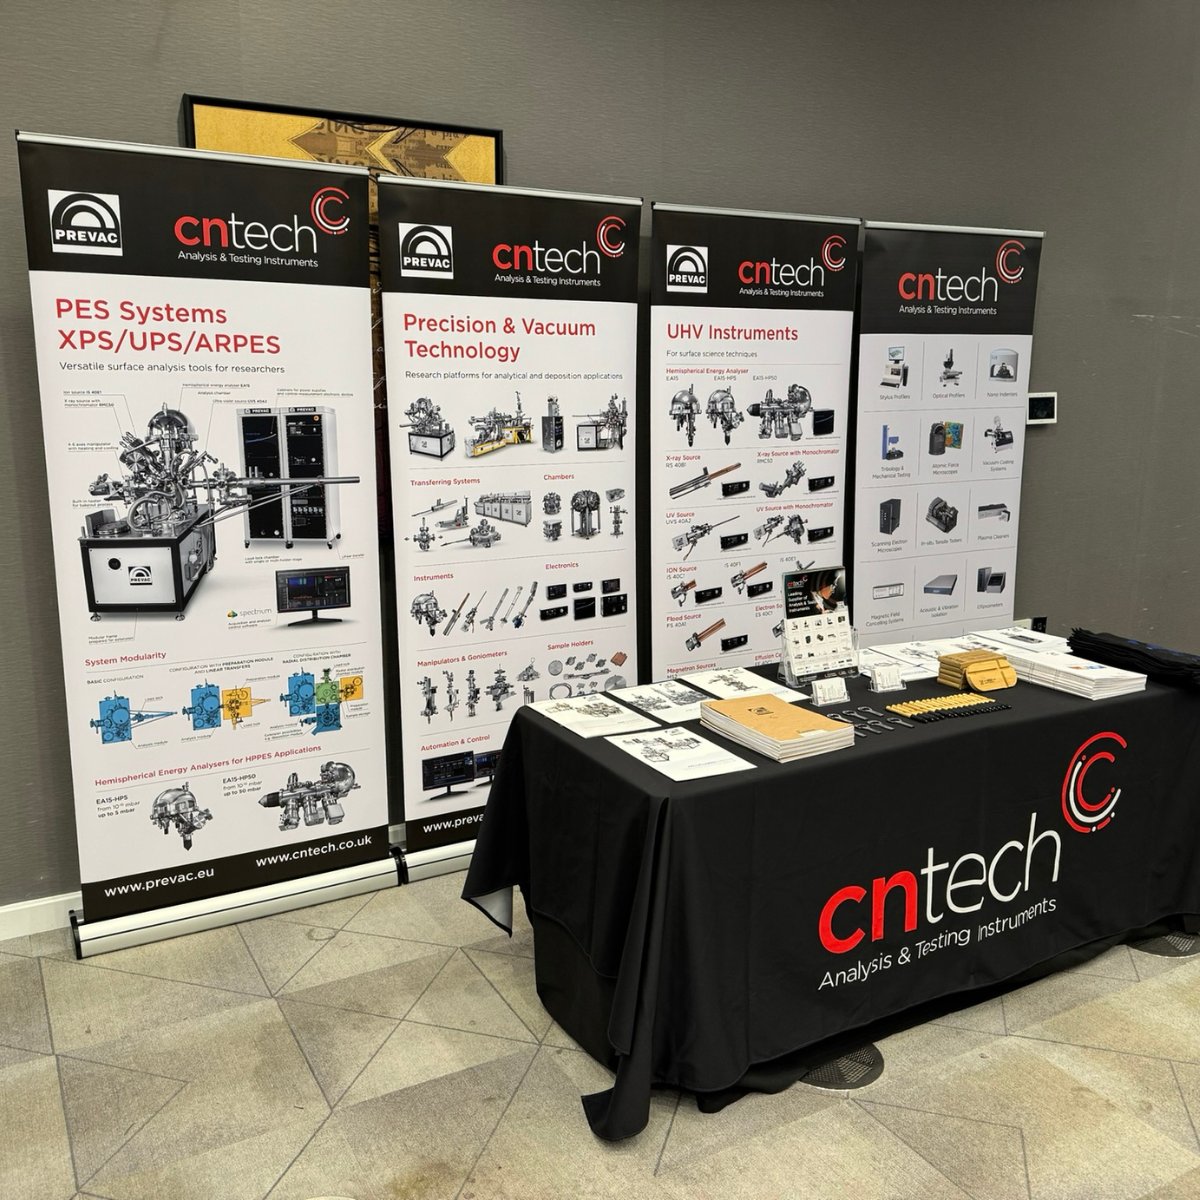 We are at UKSAF today representing @PREVAC1 Make sure you stop by our stand and say hello to Jon and Martin! #UKSAF #surfaceanalysis #surfacescience #exhibition